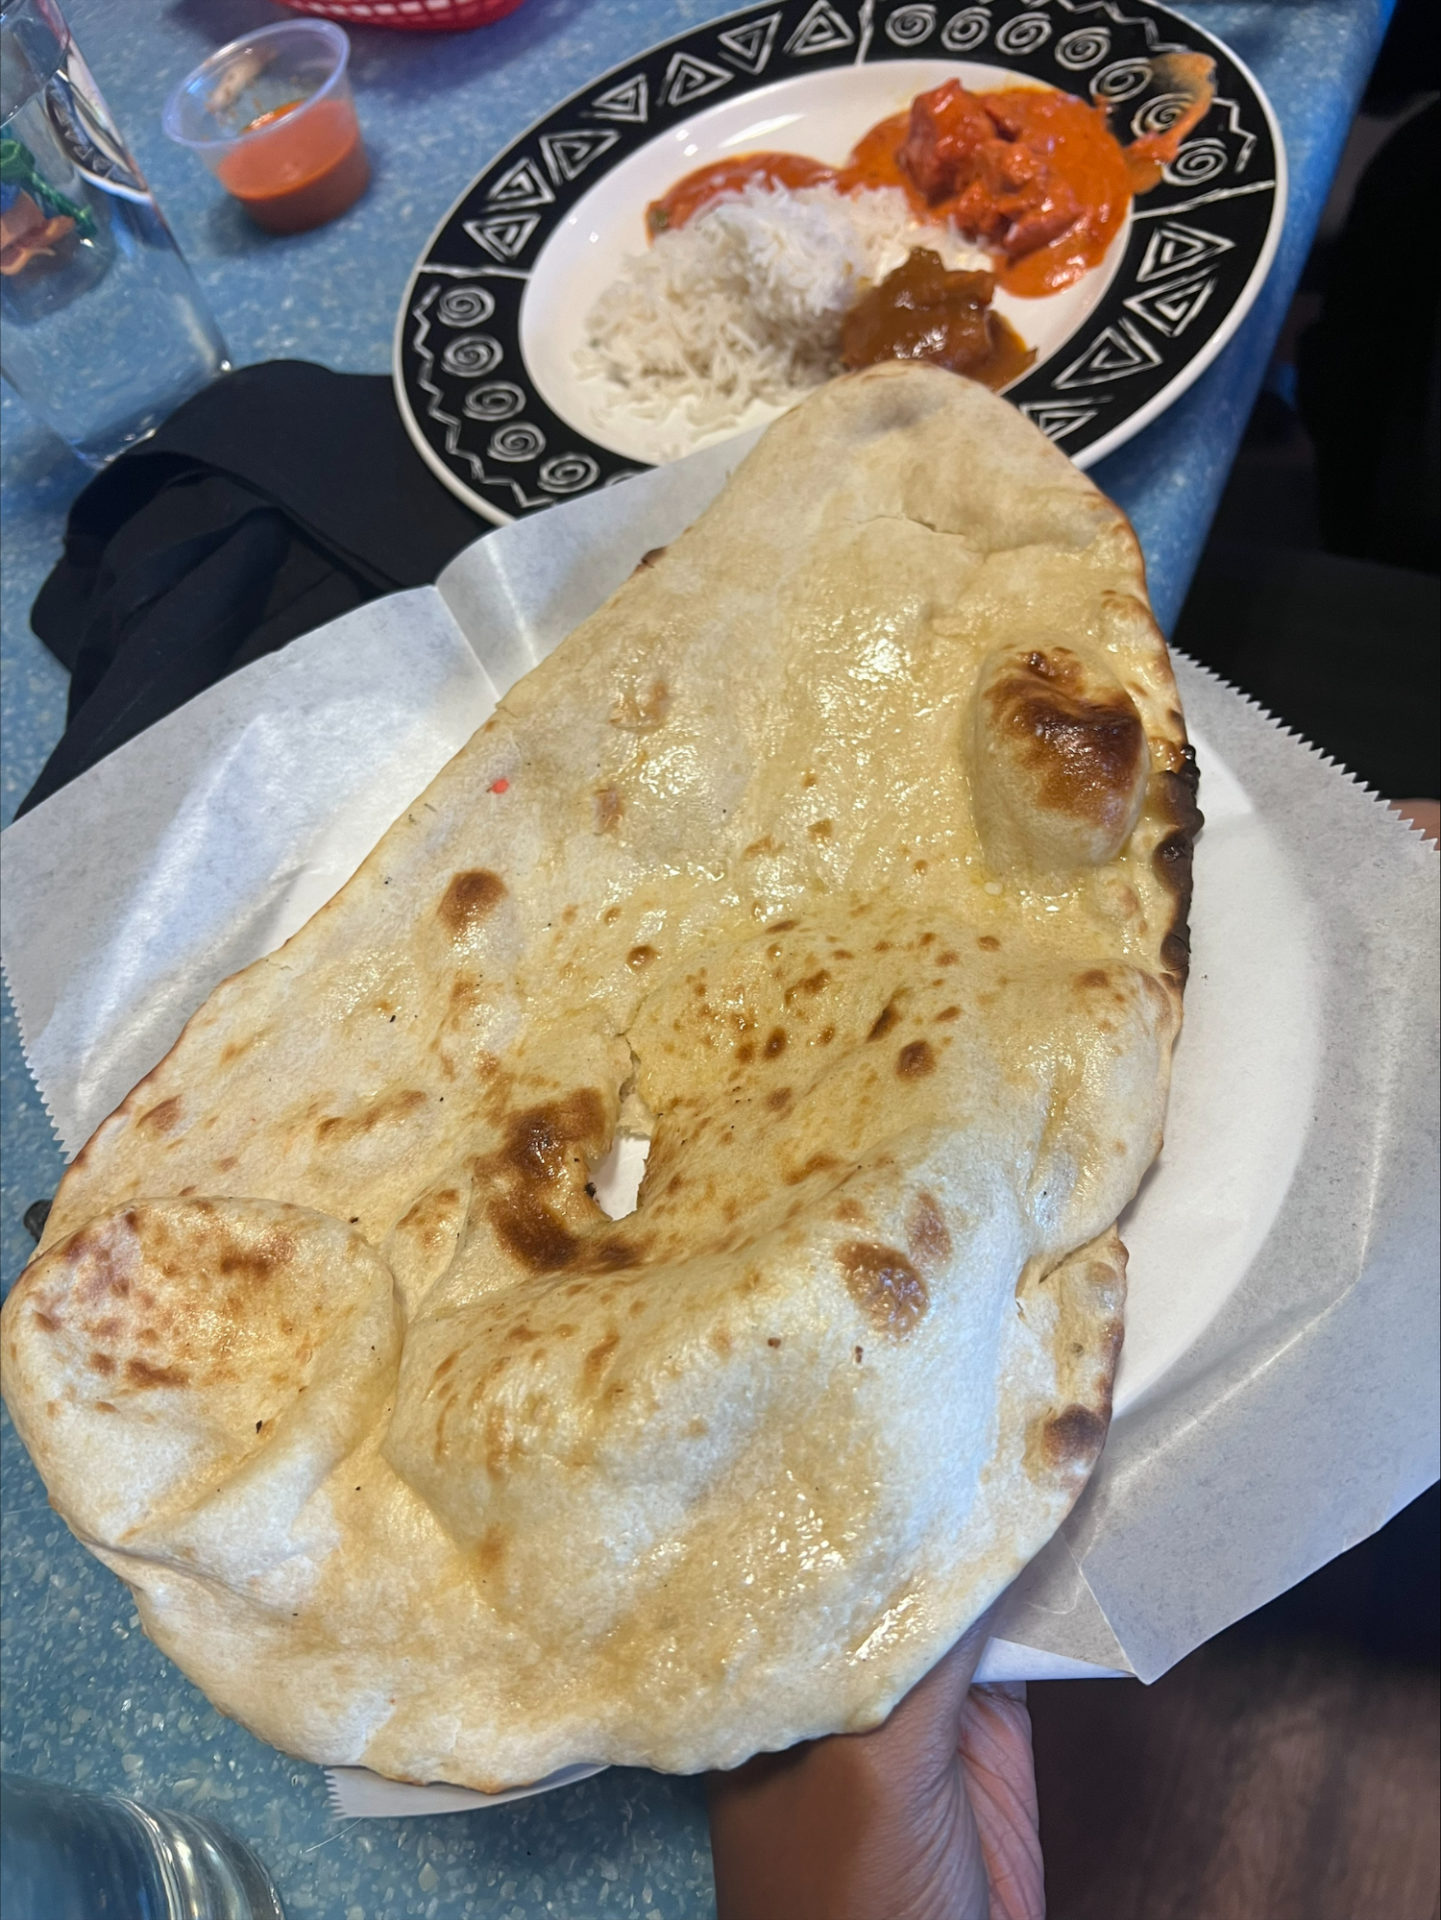 The naan bread at Masala Indian House